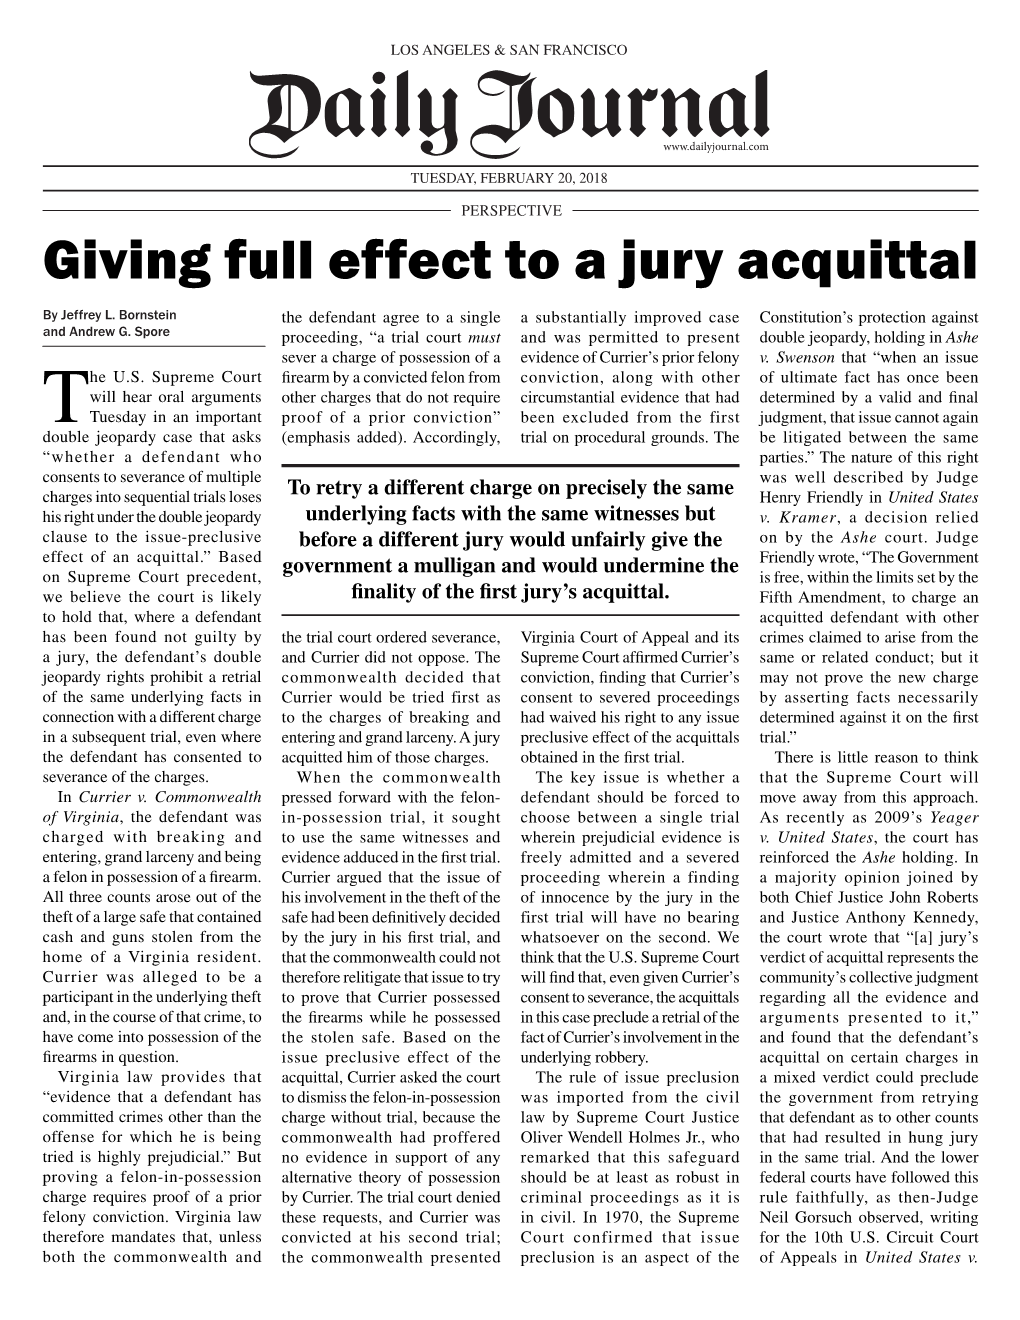 Giving Full Effect to a Jury Acquittal by Jeffrey L